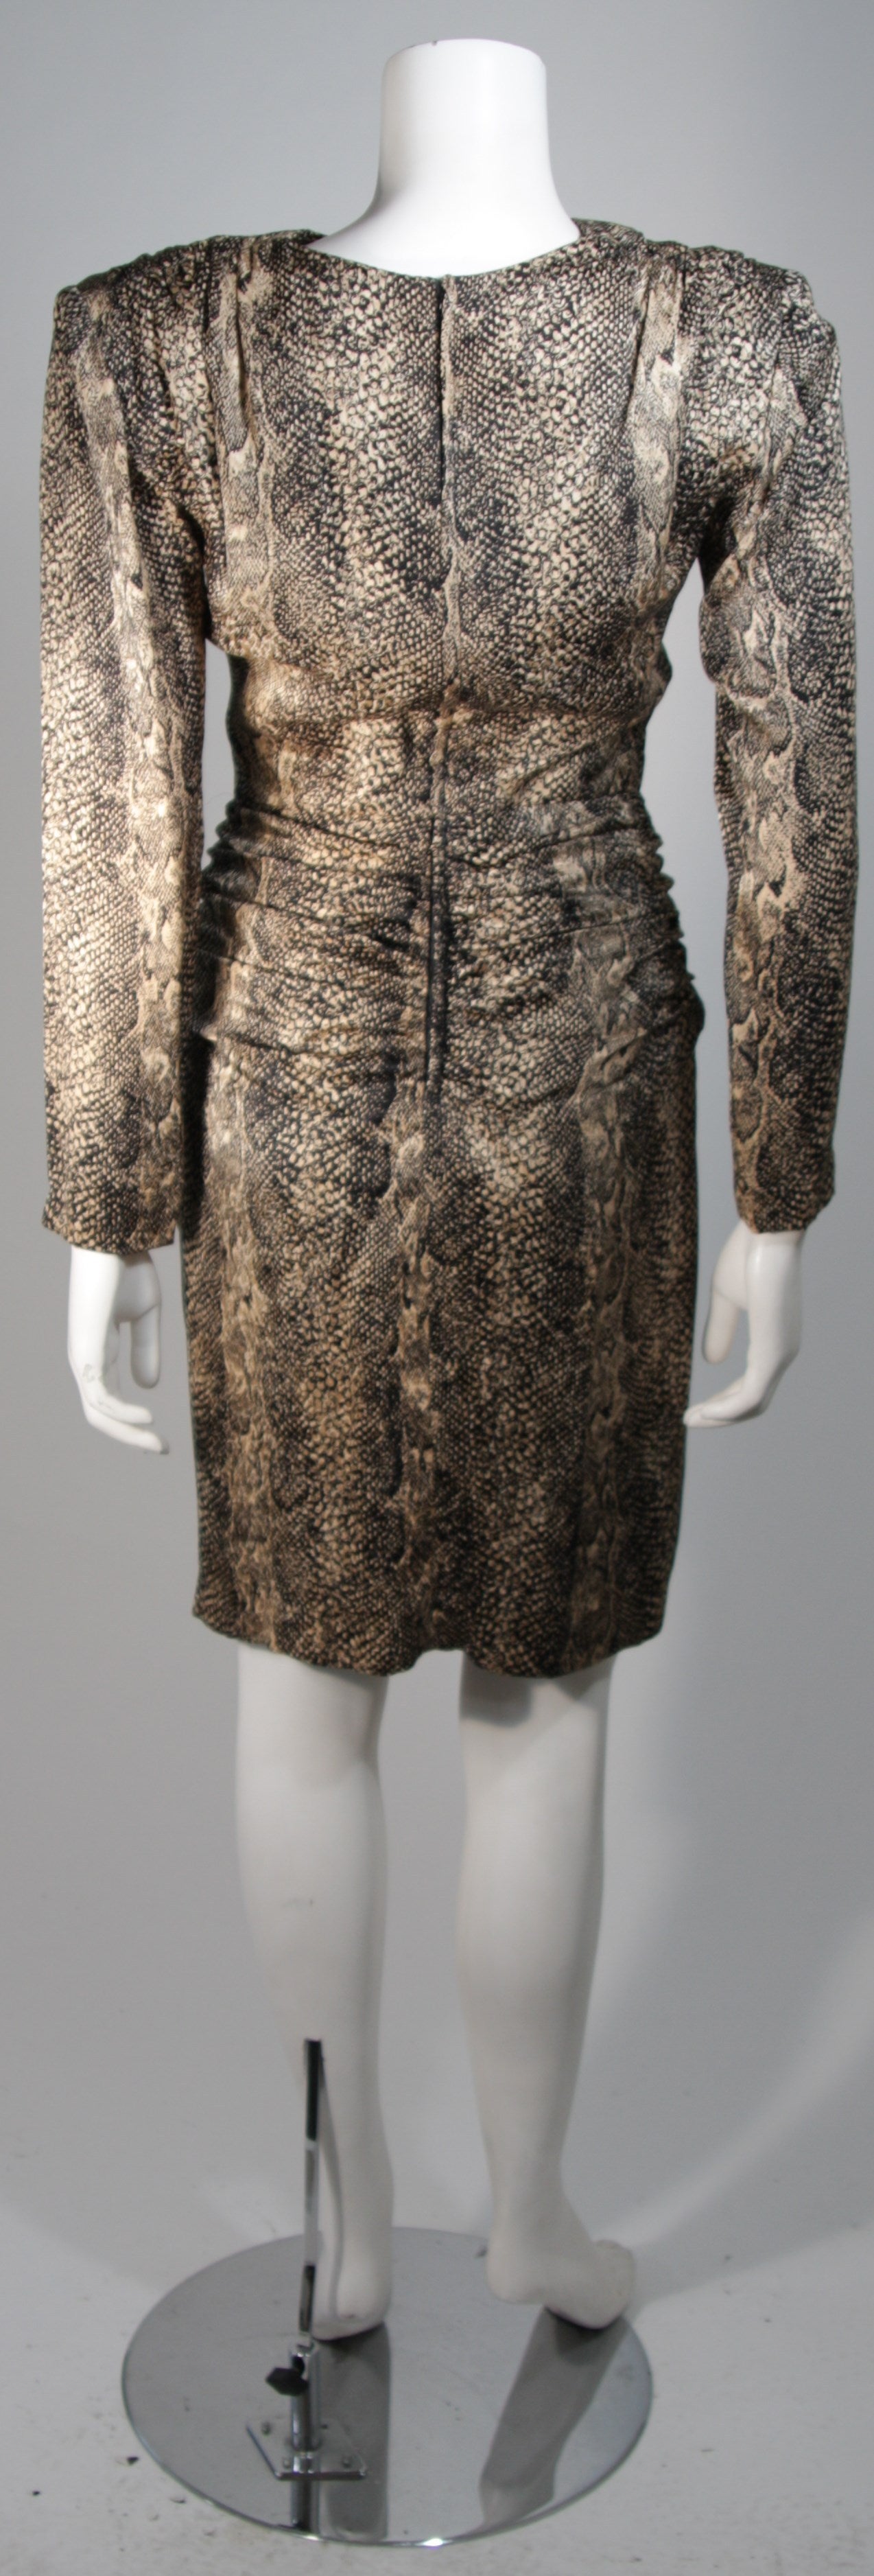 Vicky Tiel Silk Snakeskin Cocktail Dress with Draping Size Small 4